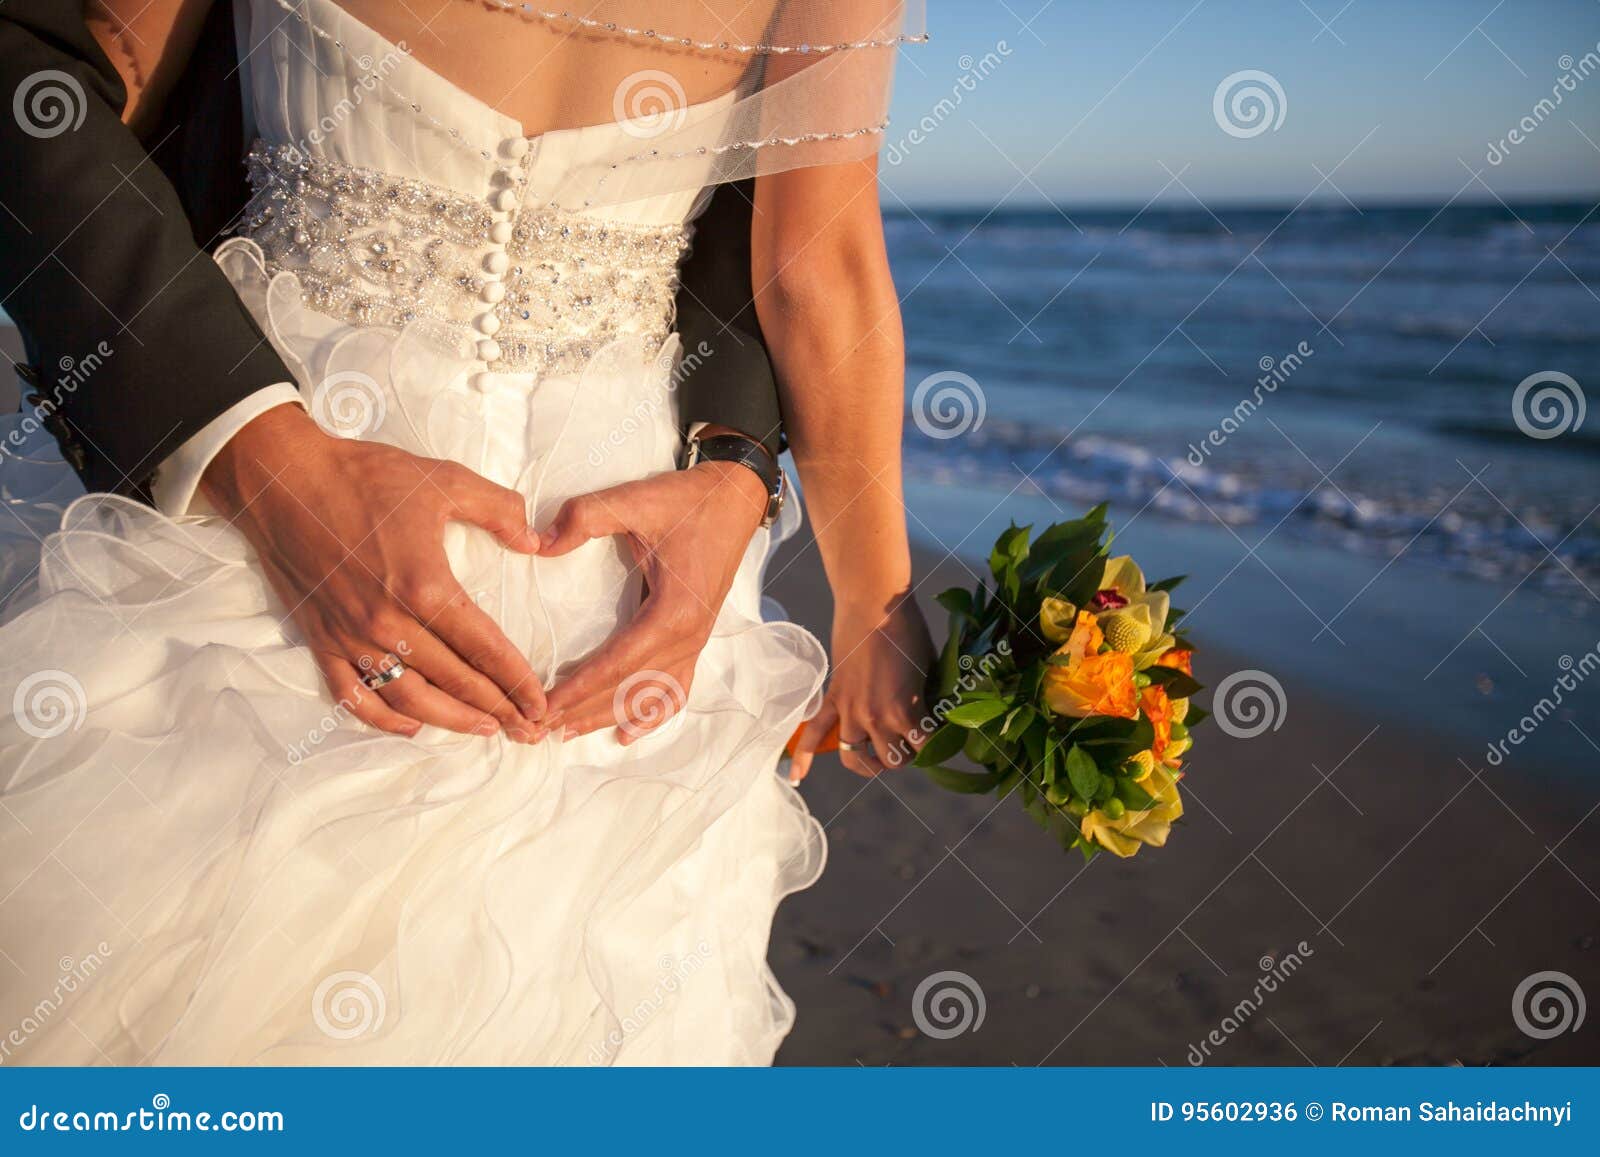 couple smiling and embracing near wedding arch on beach. honeymoon on sea or ocean